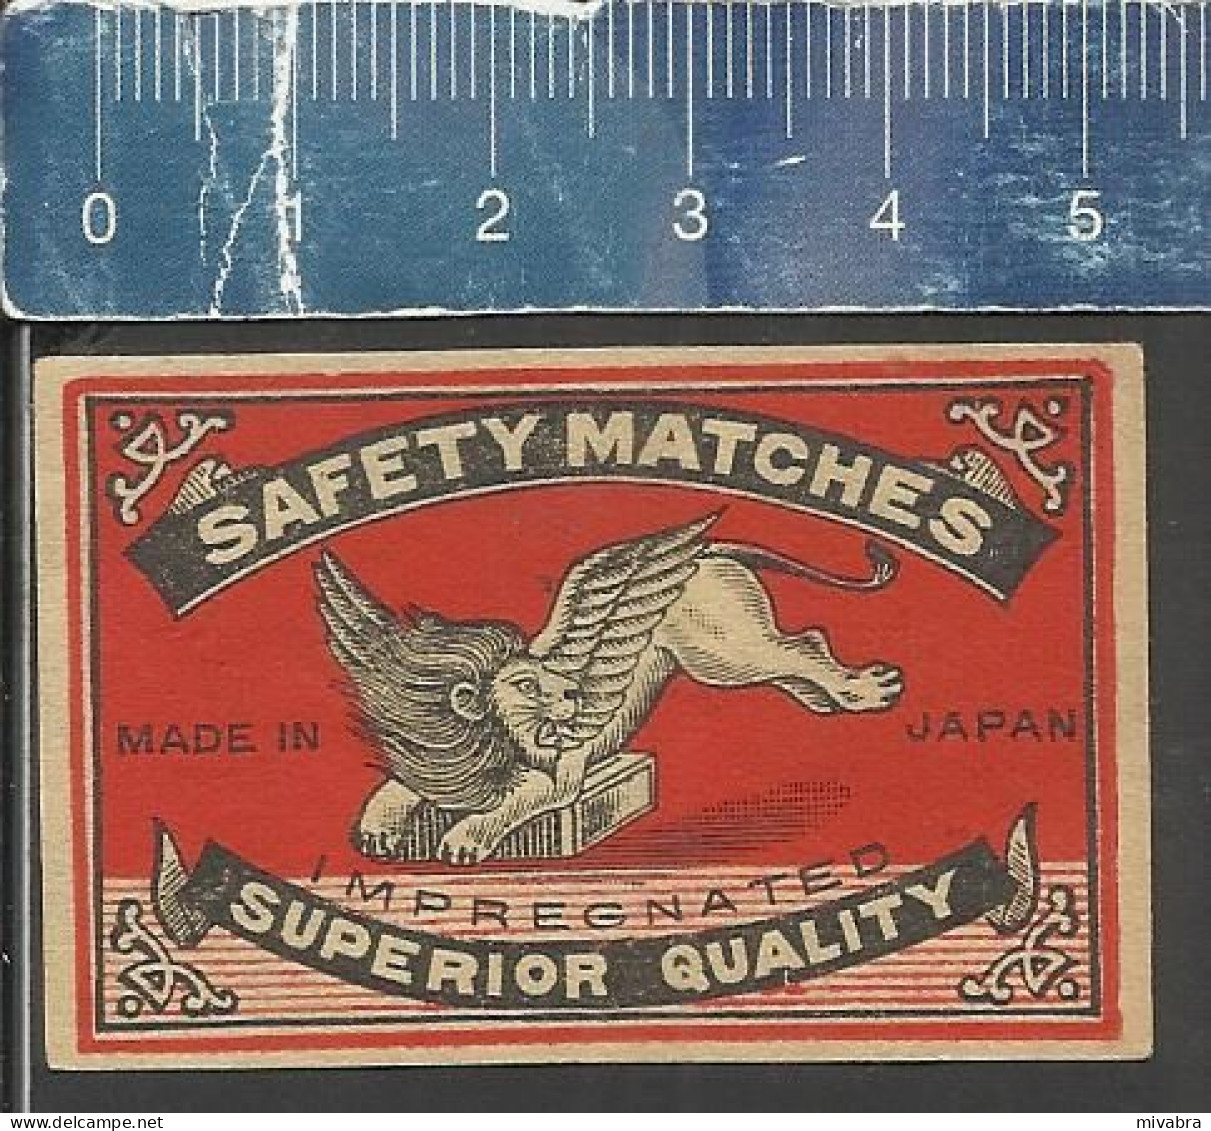 WINGED LION WITH WINGS SAFETY MATCHES IMPREGNATED SUPERIOR QUALITY - OLD VINTAGE MATCHBOX LABEL MADE JAPAN - Zündholzschachteletiketten